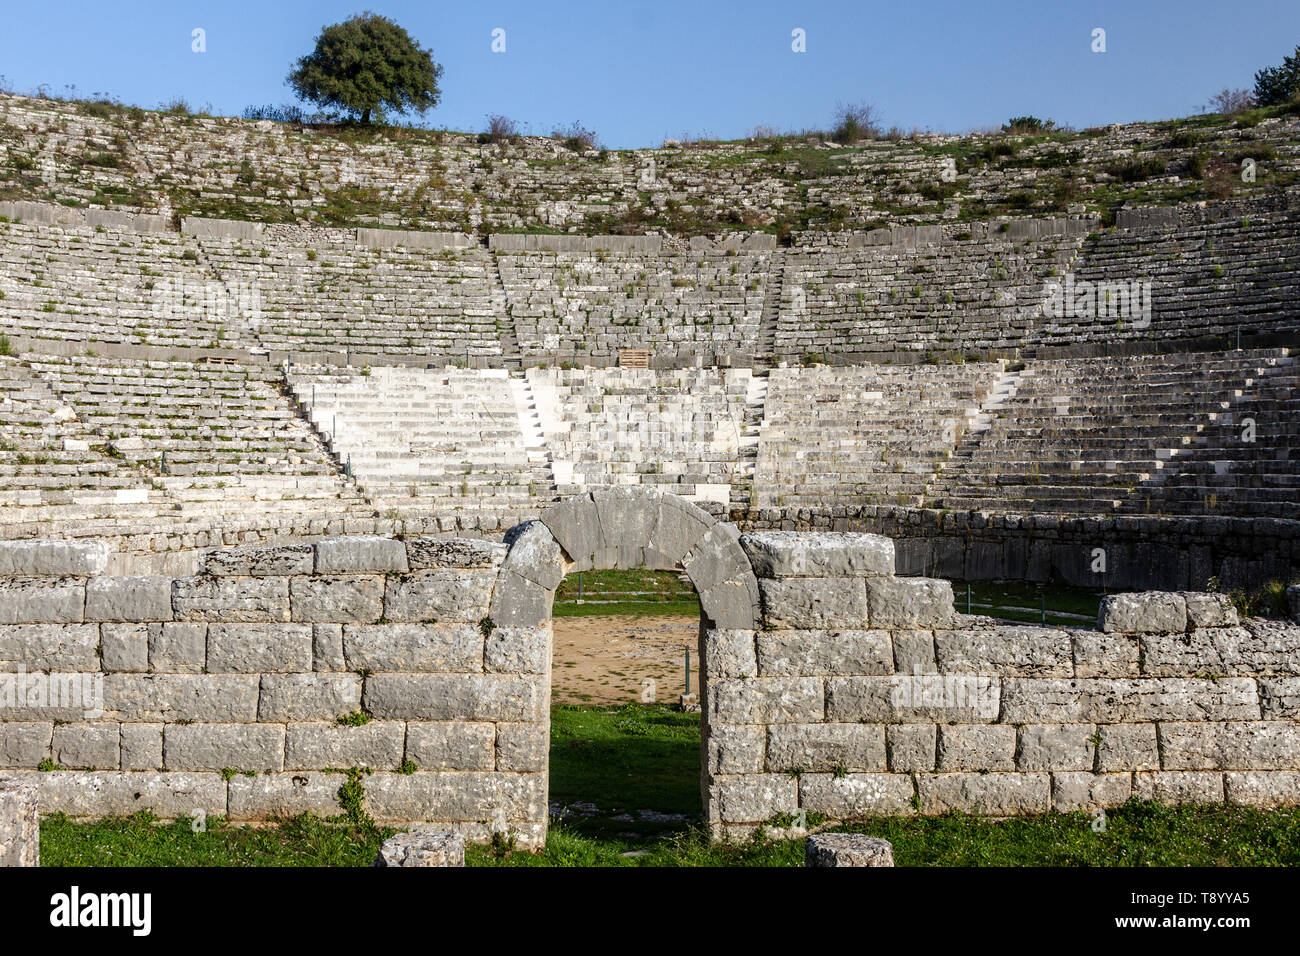 Dodoni ancient theatre, one of the largest and best preserved ancient greek theaters, situated in Epirus region, near Ioannina city, Greece, Europe. Stock Photo